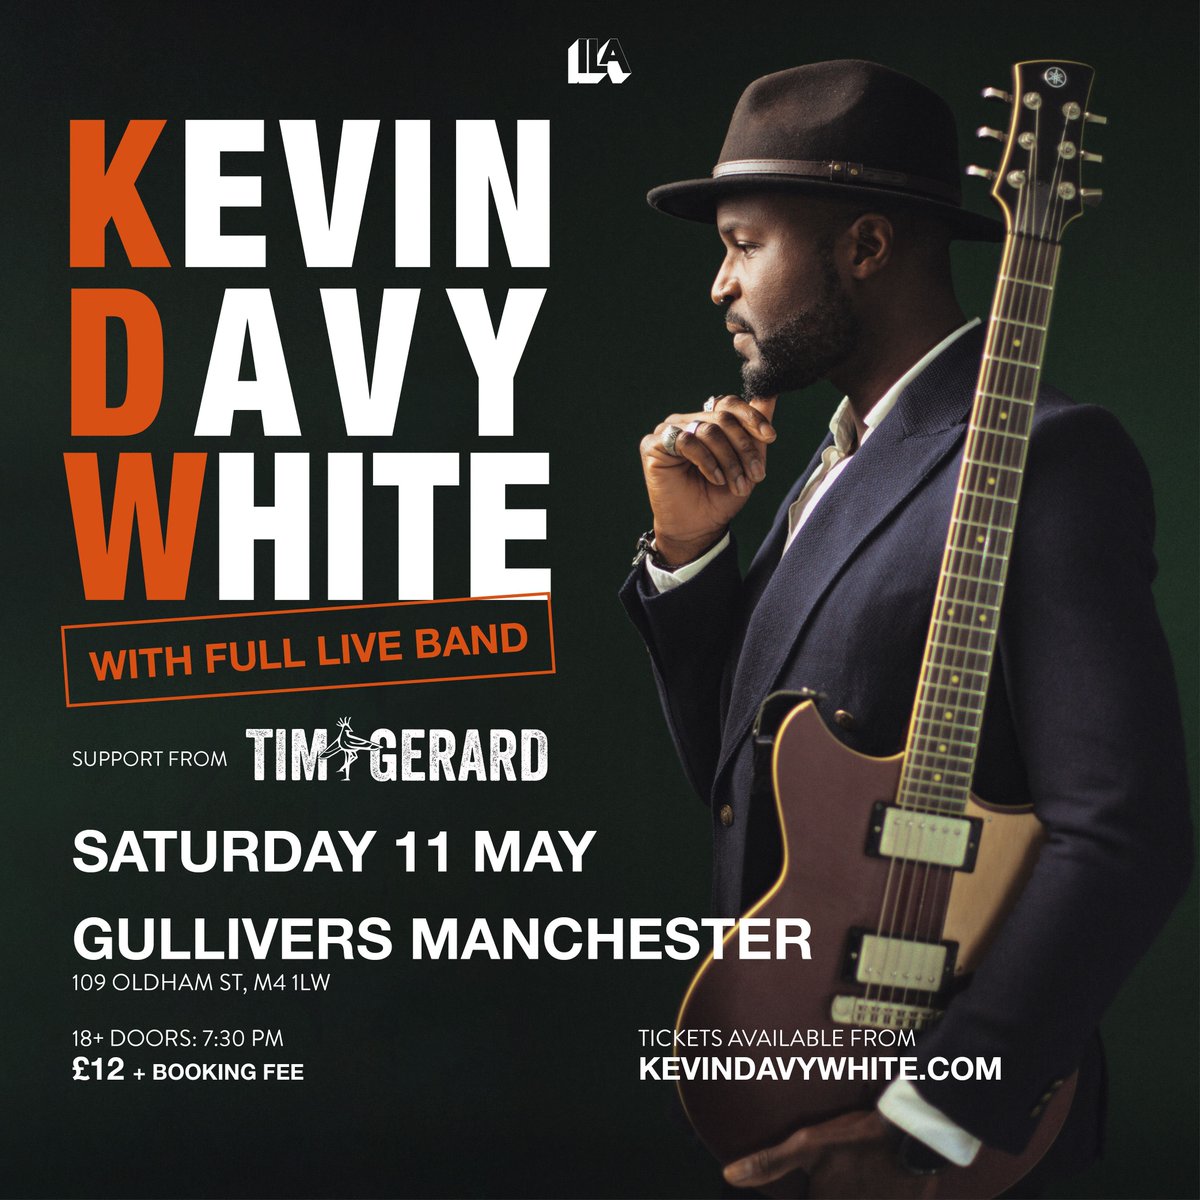 SATURDAY NIGHT The X Factor finalist and rock, blues and soul musician @KevinDavyWhite live with full band at @gulliverspub in #Manchester 📅 Saturday 11 May 🎟 book tickets: bit.ly/UTITickets Expect a sweltering cocktail of suave, soulful vocals with funk-rock panache.